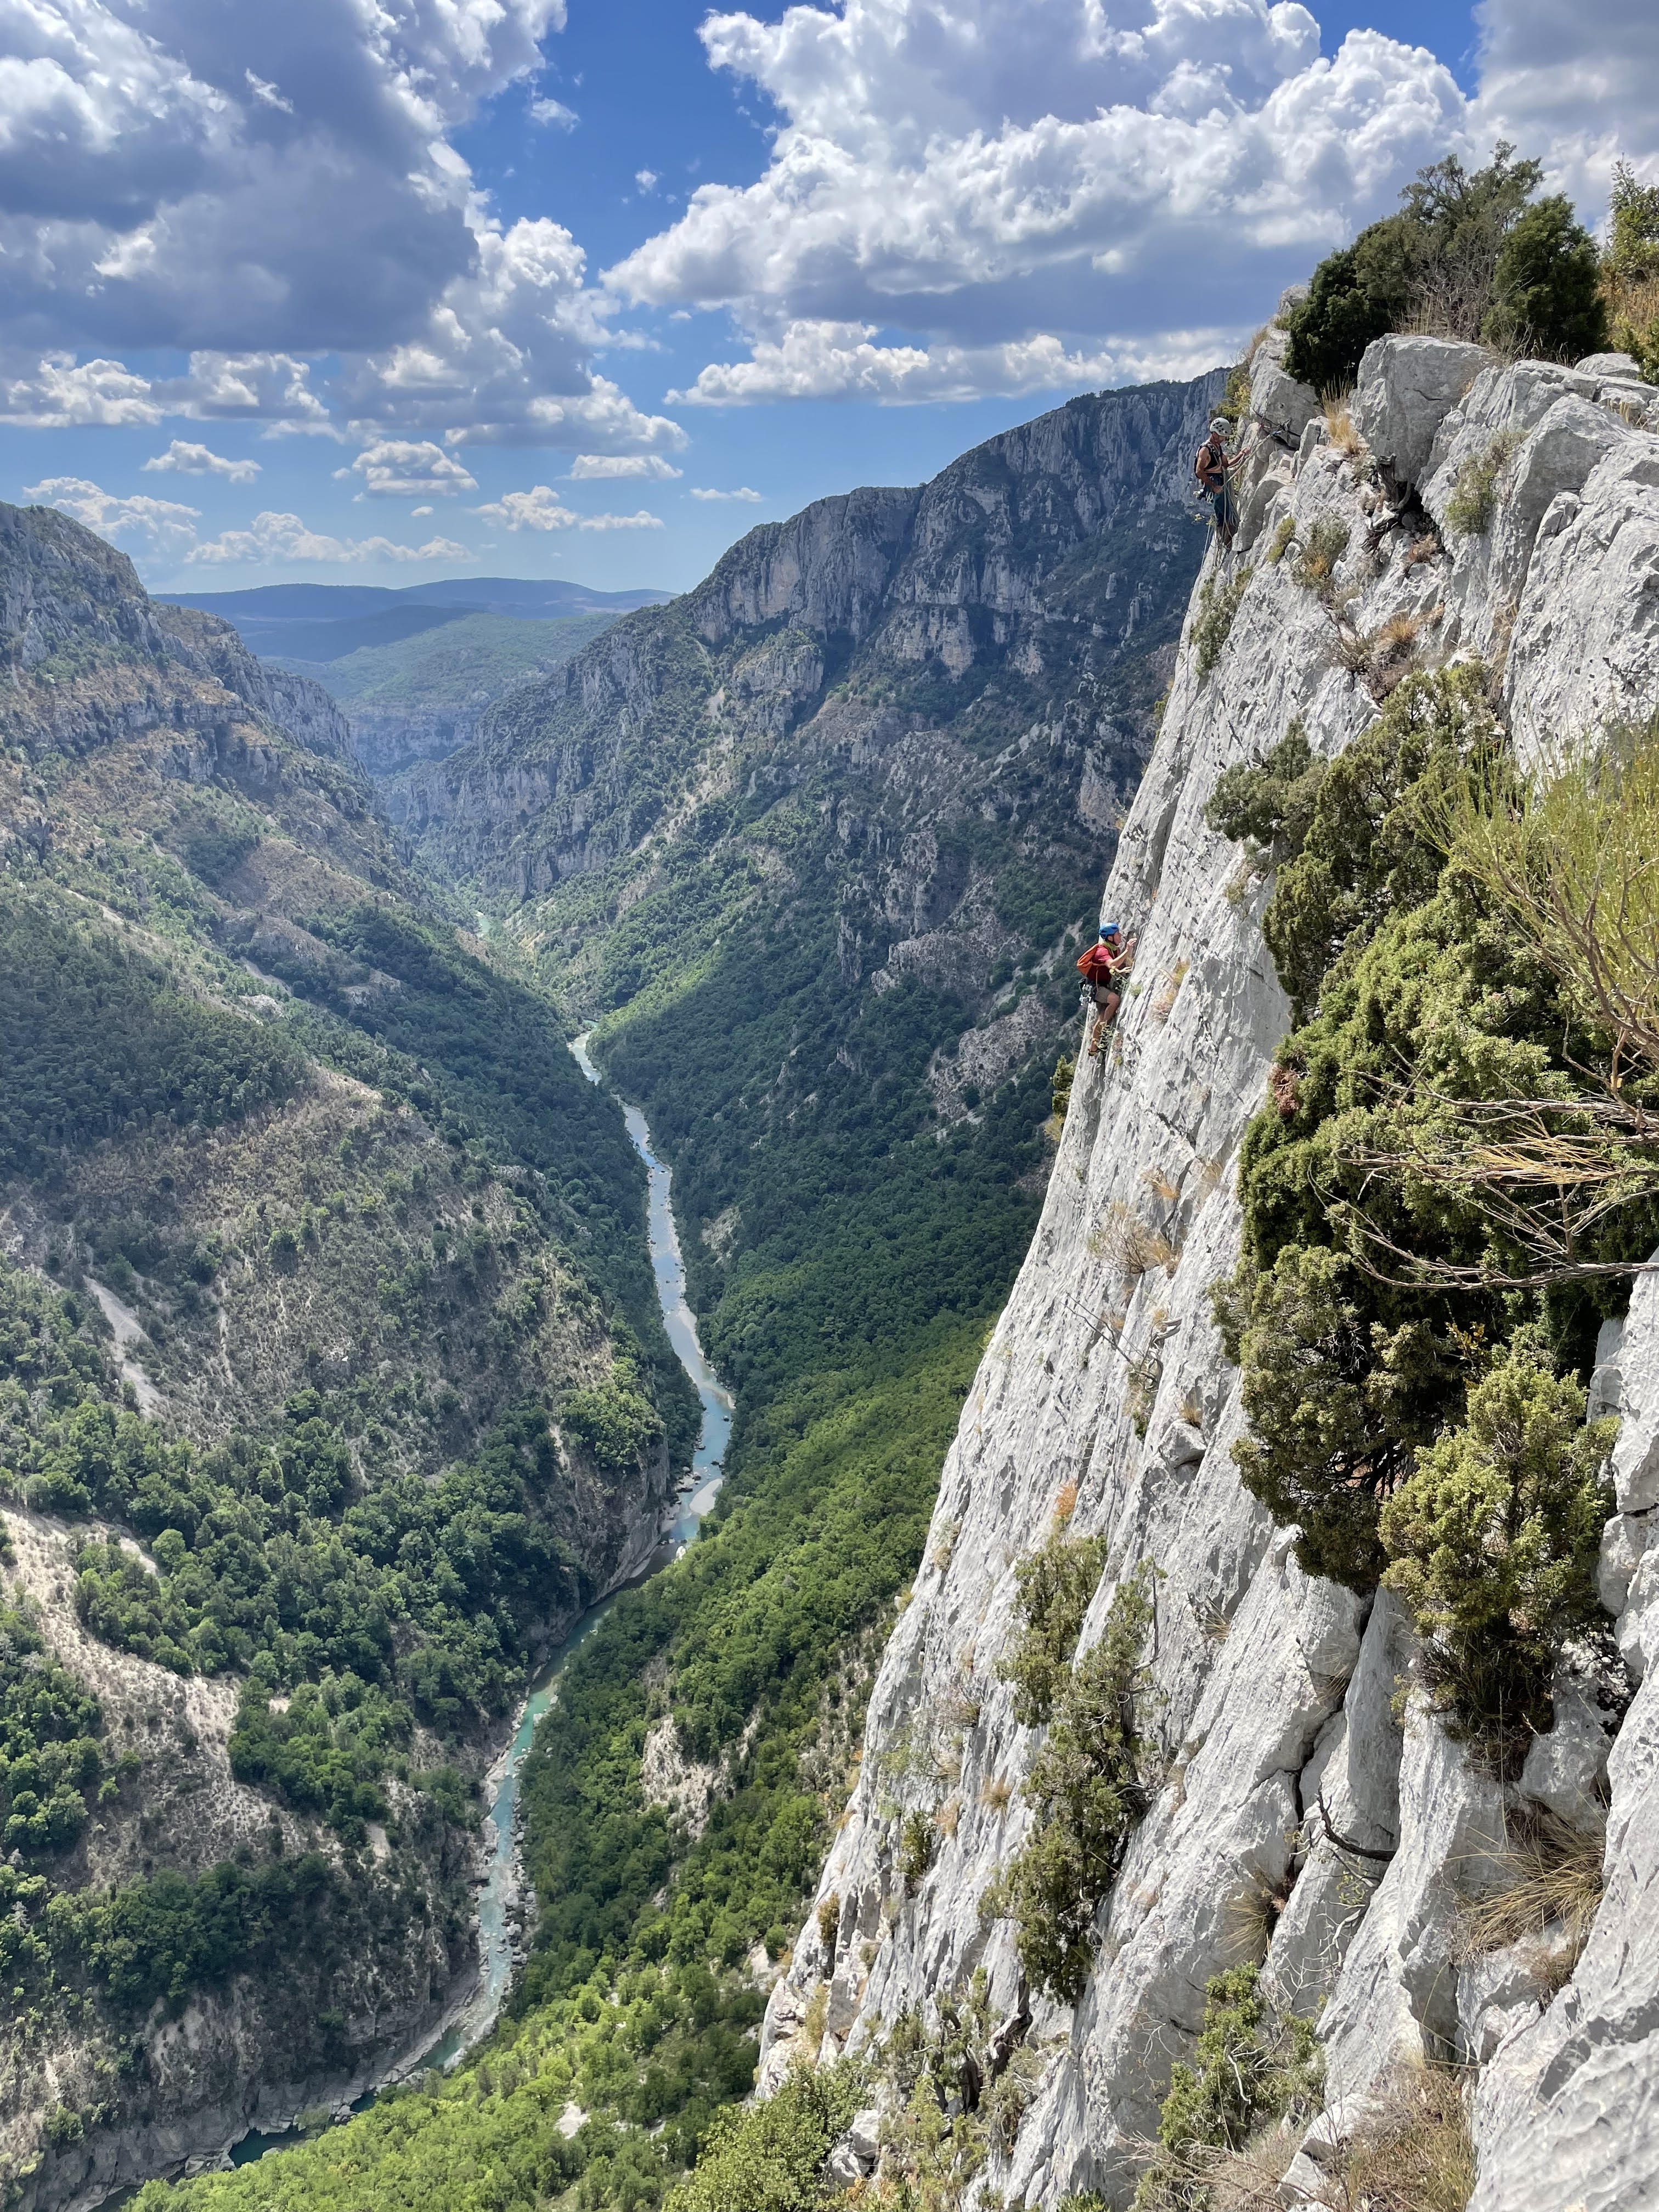 Photo Climbing training courses in the Verdon Gorges